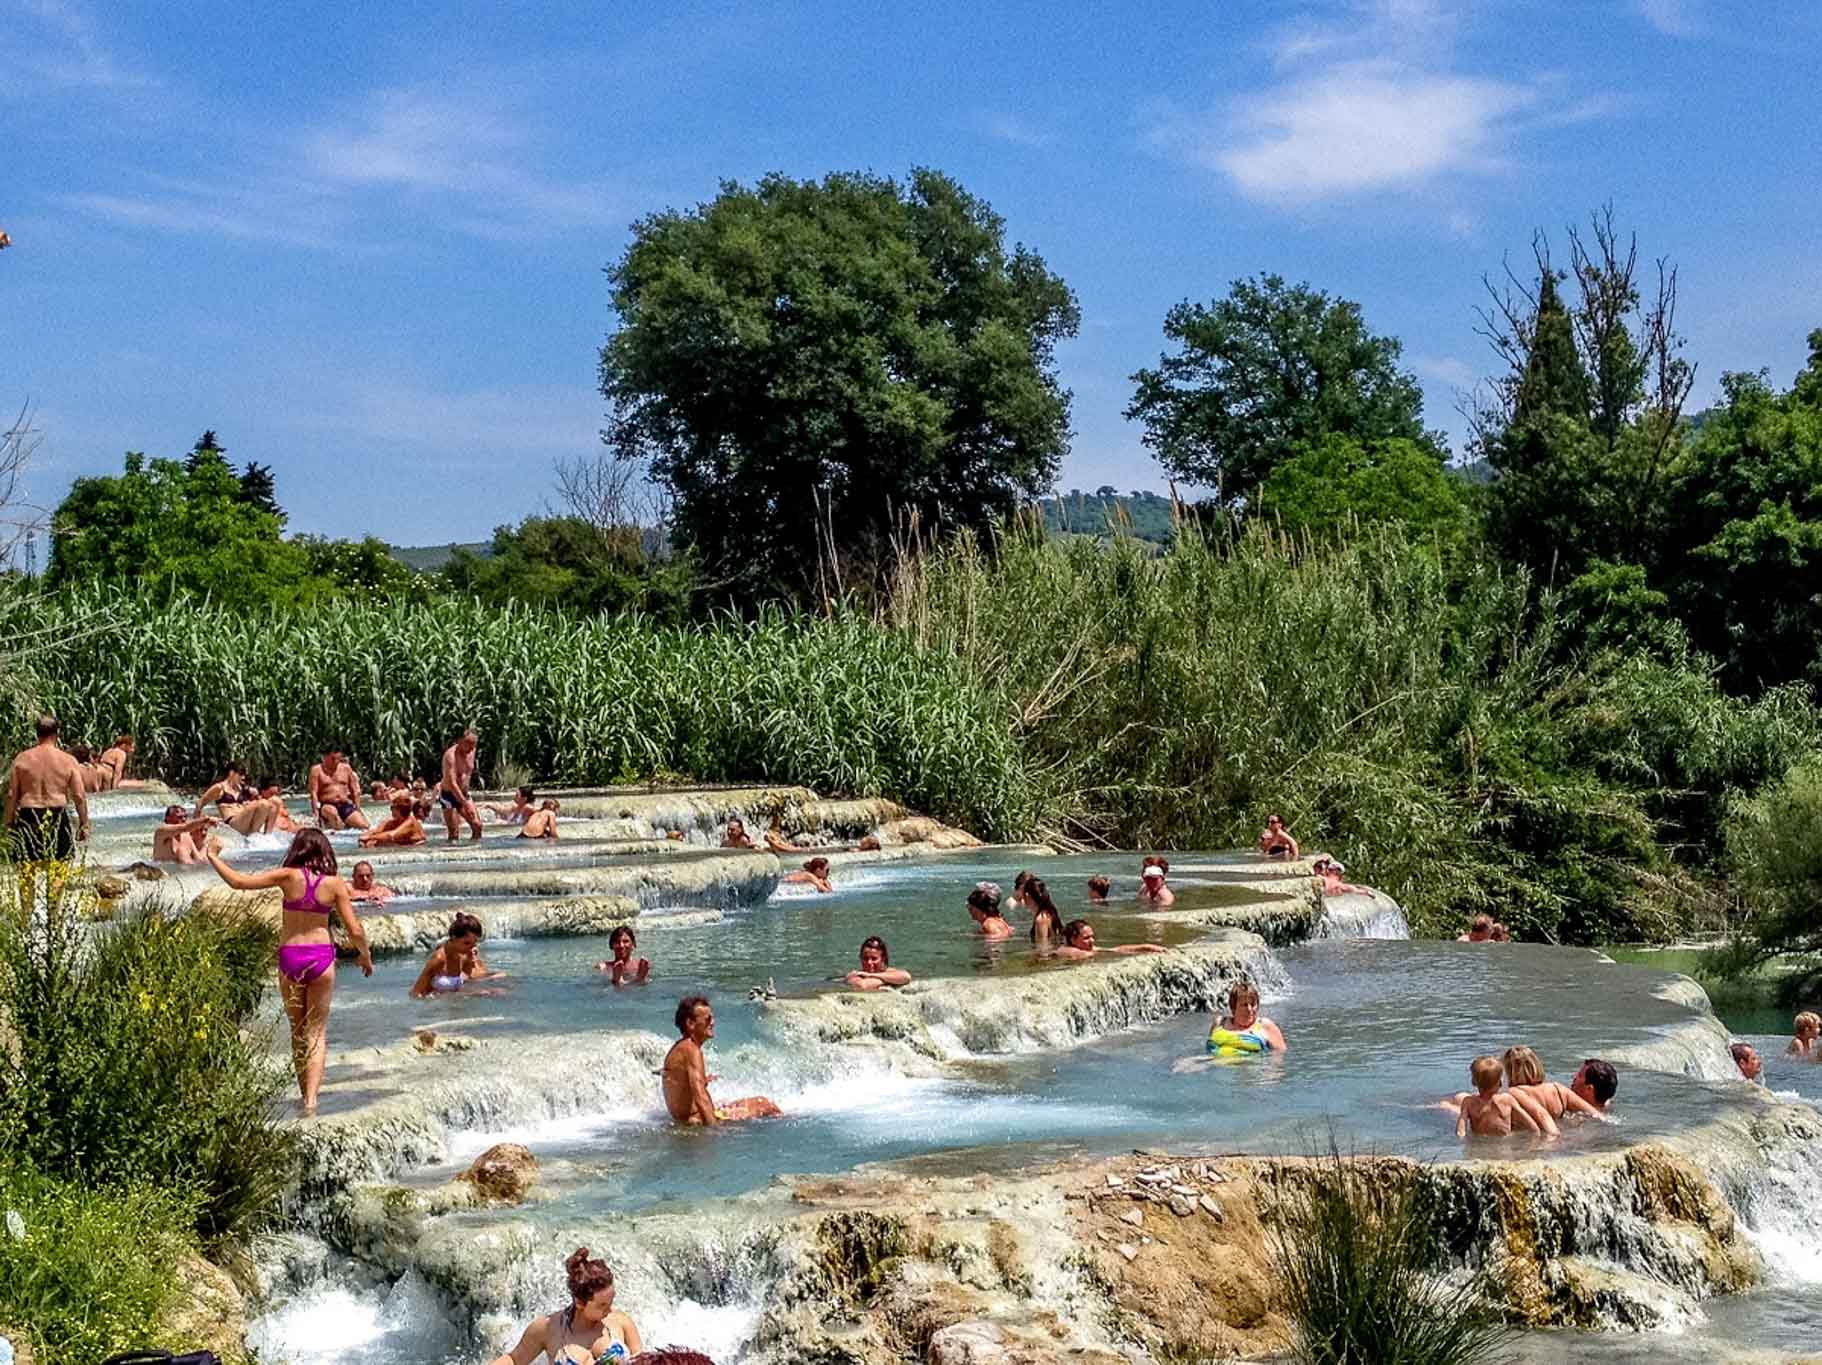 Bathers in outdoor natural pools